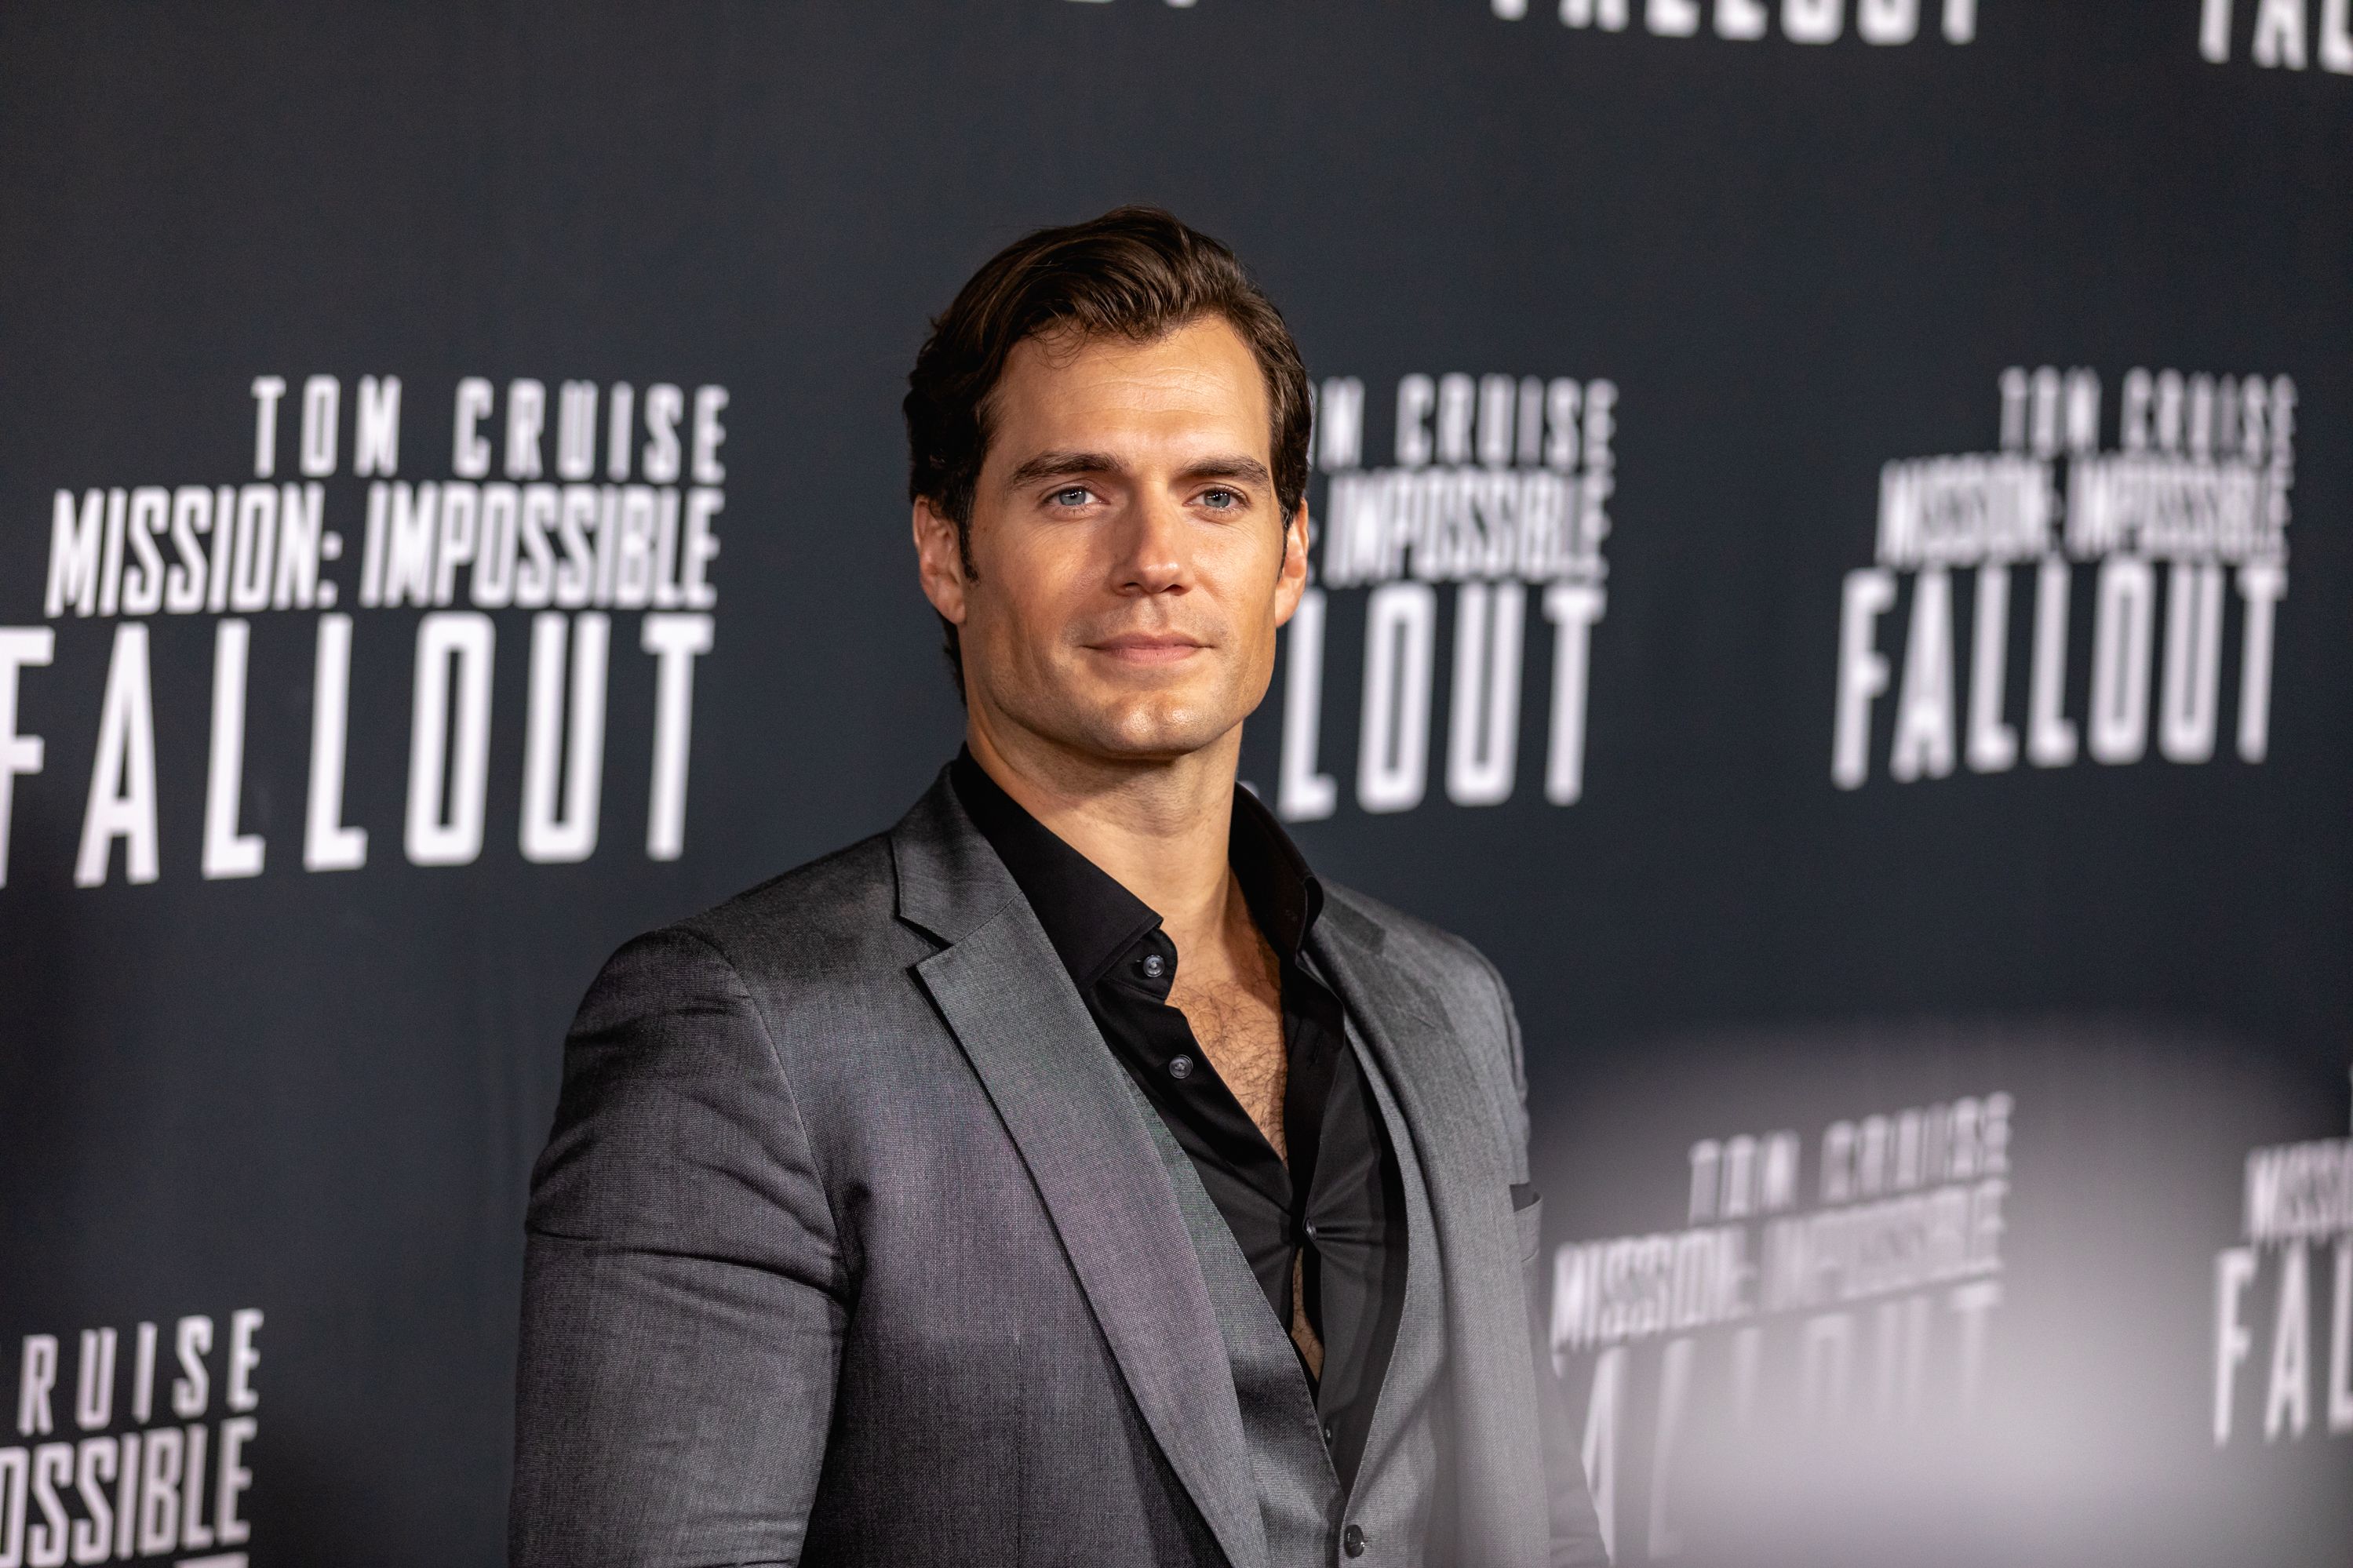 Fans hope Henry Cavill will be cast as 007 after he revealed he won't be